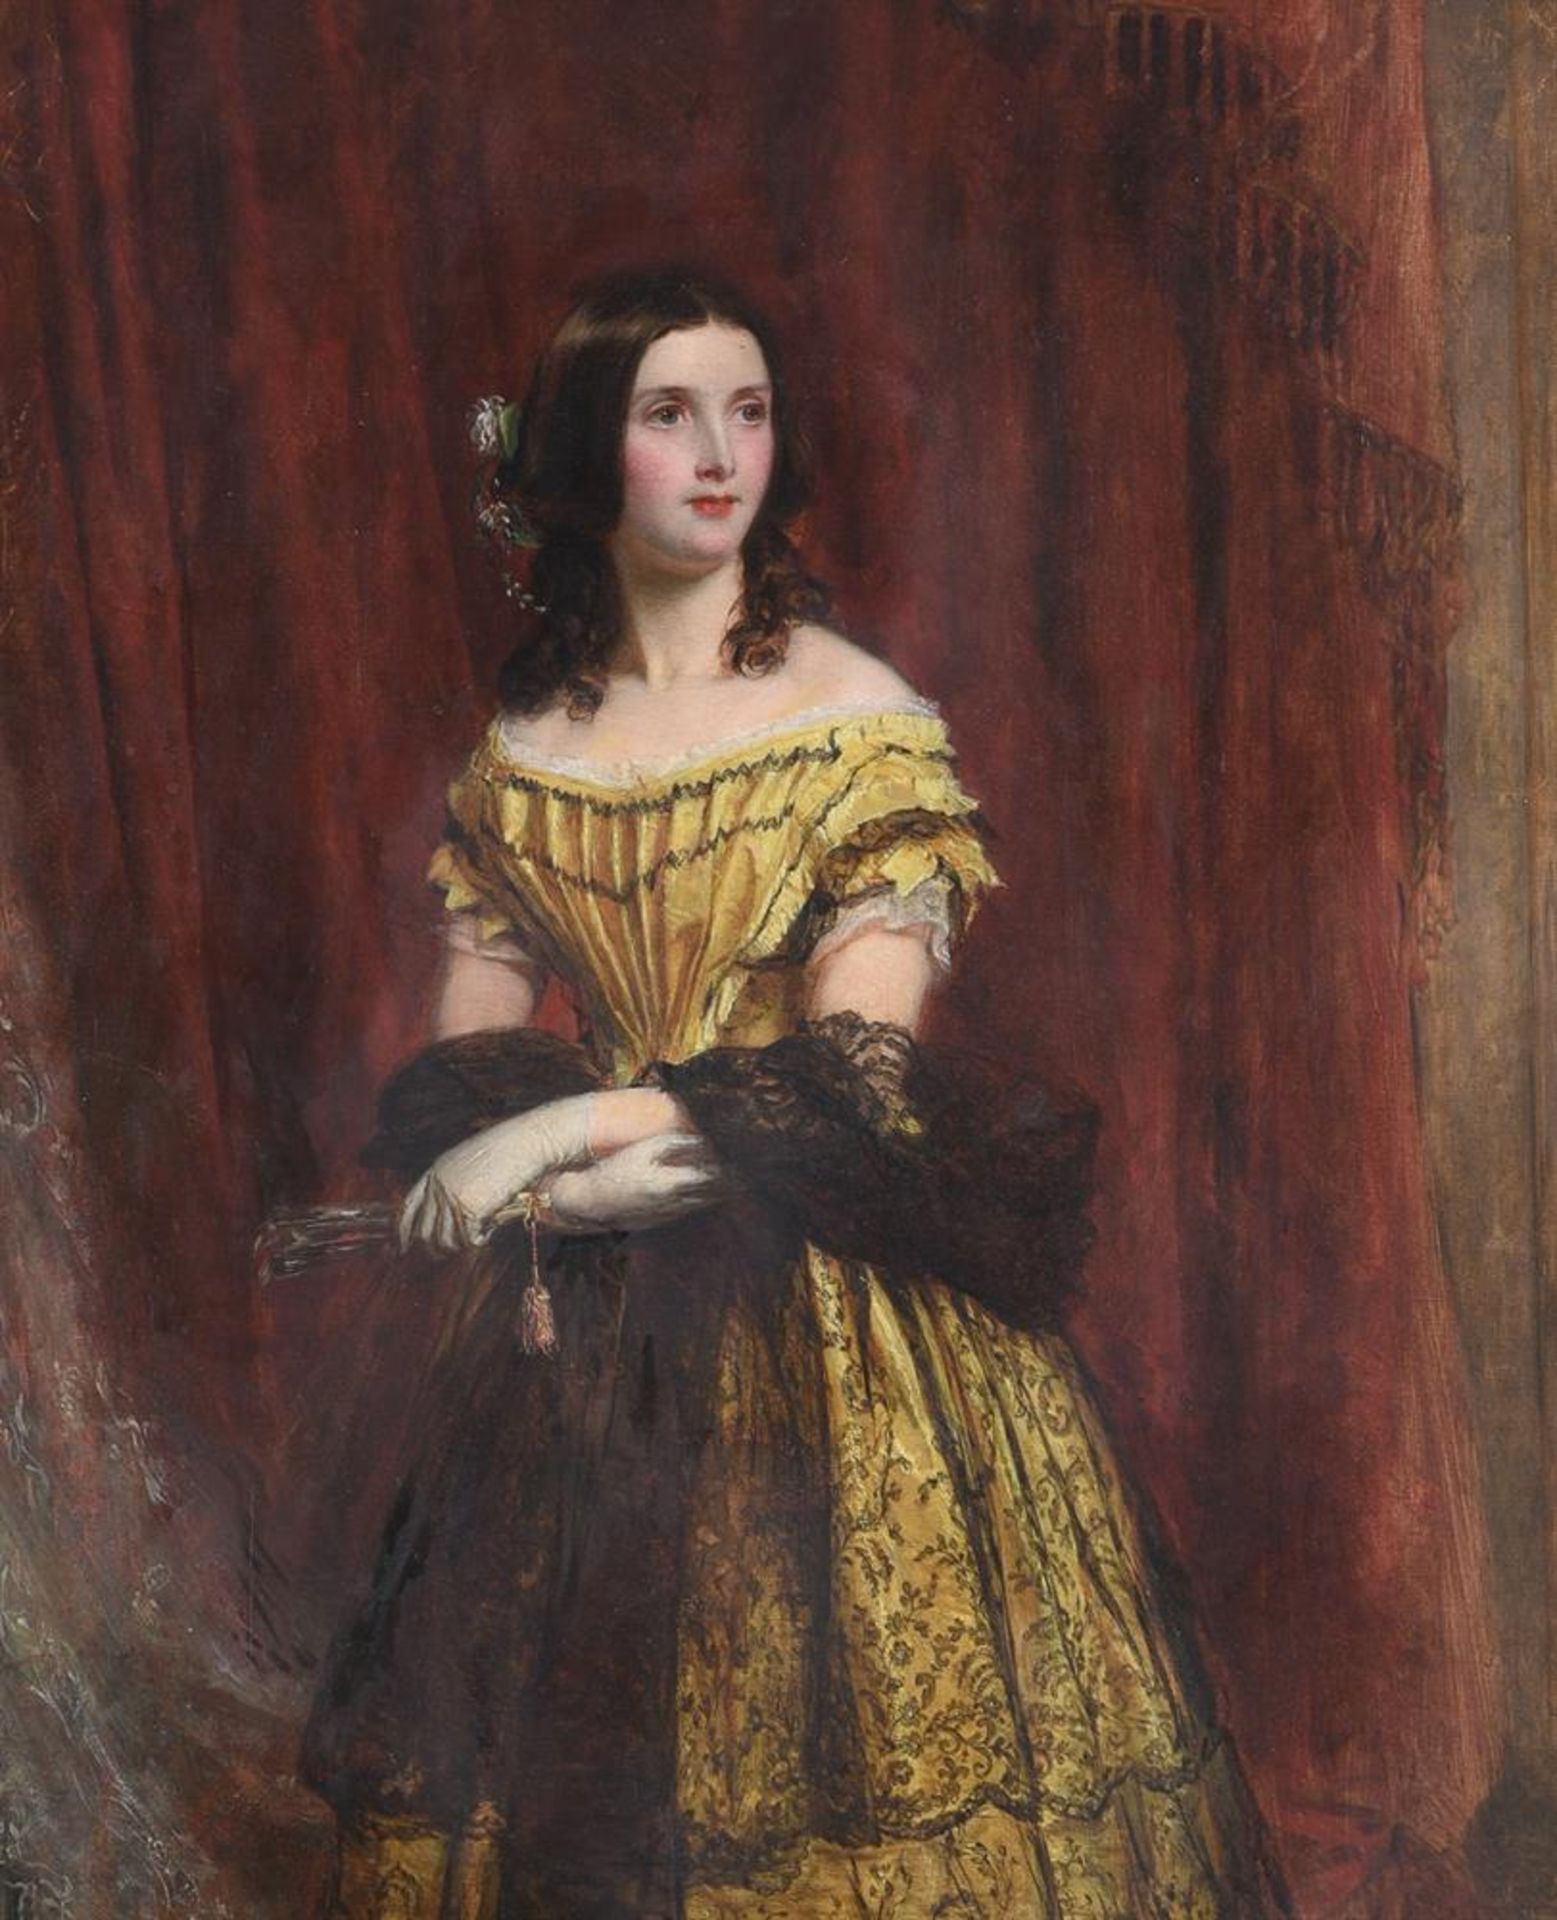 WILLIAM POWELL FRITH (BRITISH 1819-1909), MISS KATIE COATES, THE HOUSEKEEPER AT PORTAL, 1853